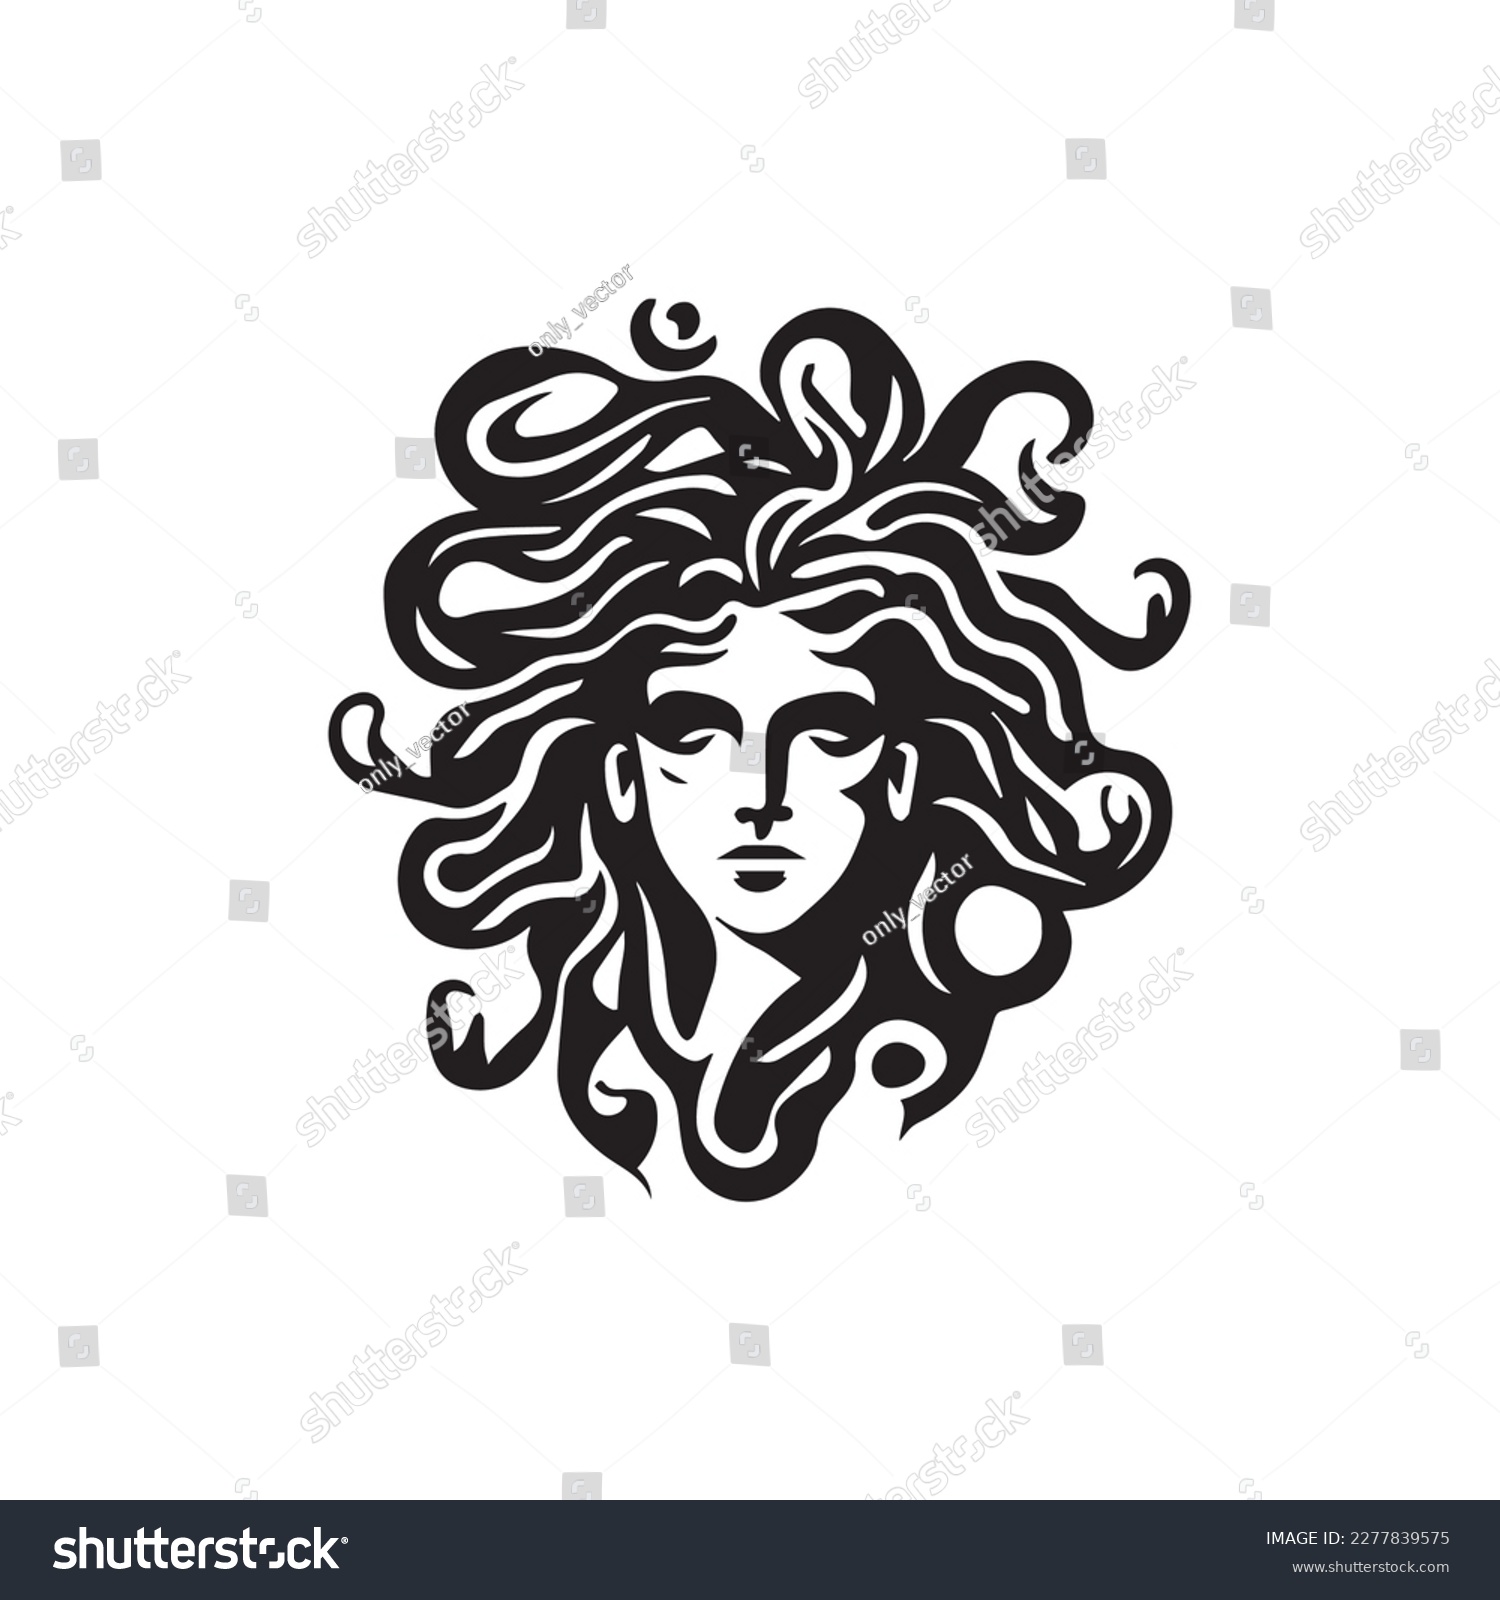 SVG of Ancient greek Gorgon Medusa, woman head logo. Vector illustration of female face. Silhouette svg, only black and white. svg